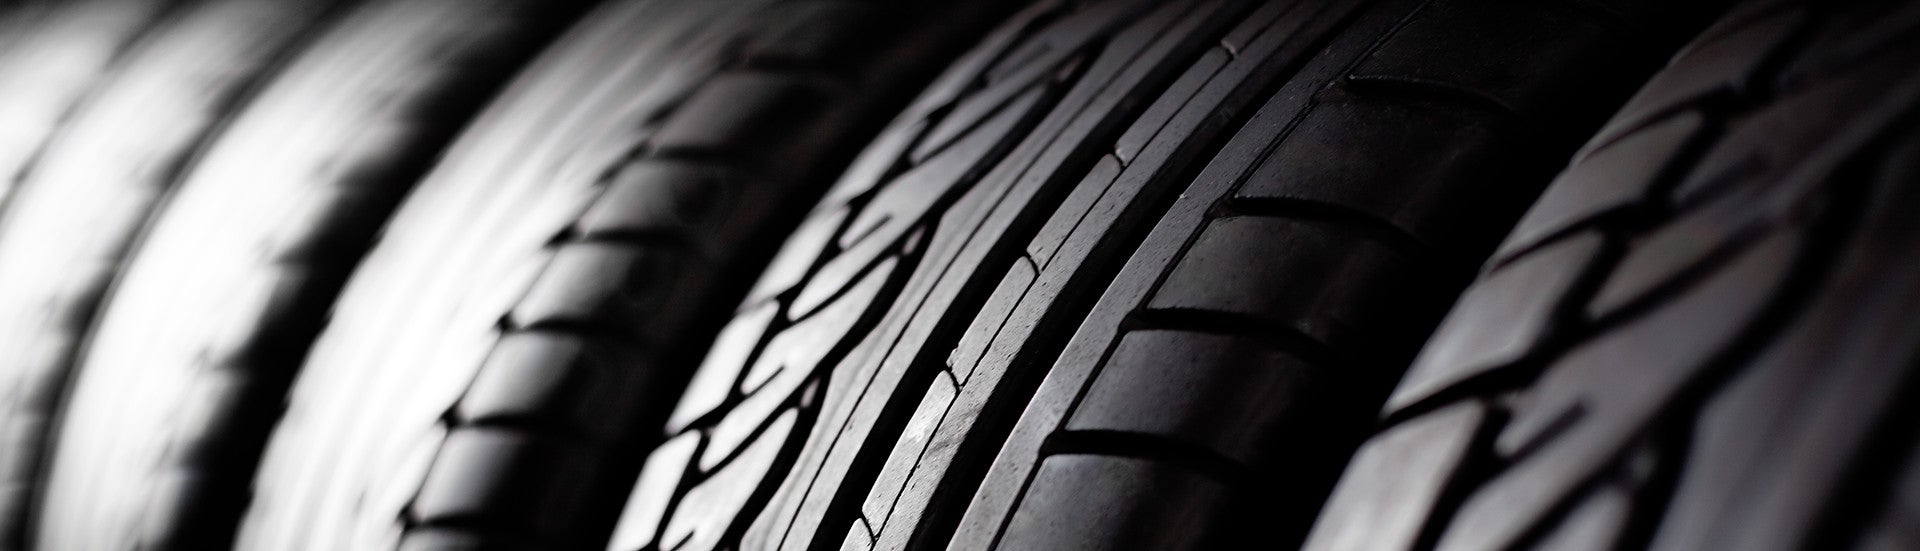 Why Tire Replacement is Important | Dale Howard Auto Center of Waverly in Waverly IA